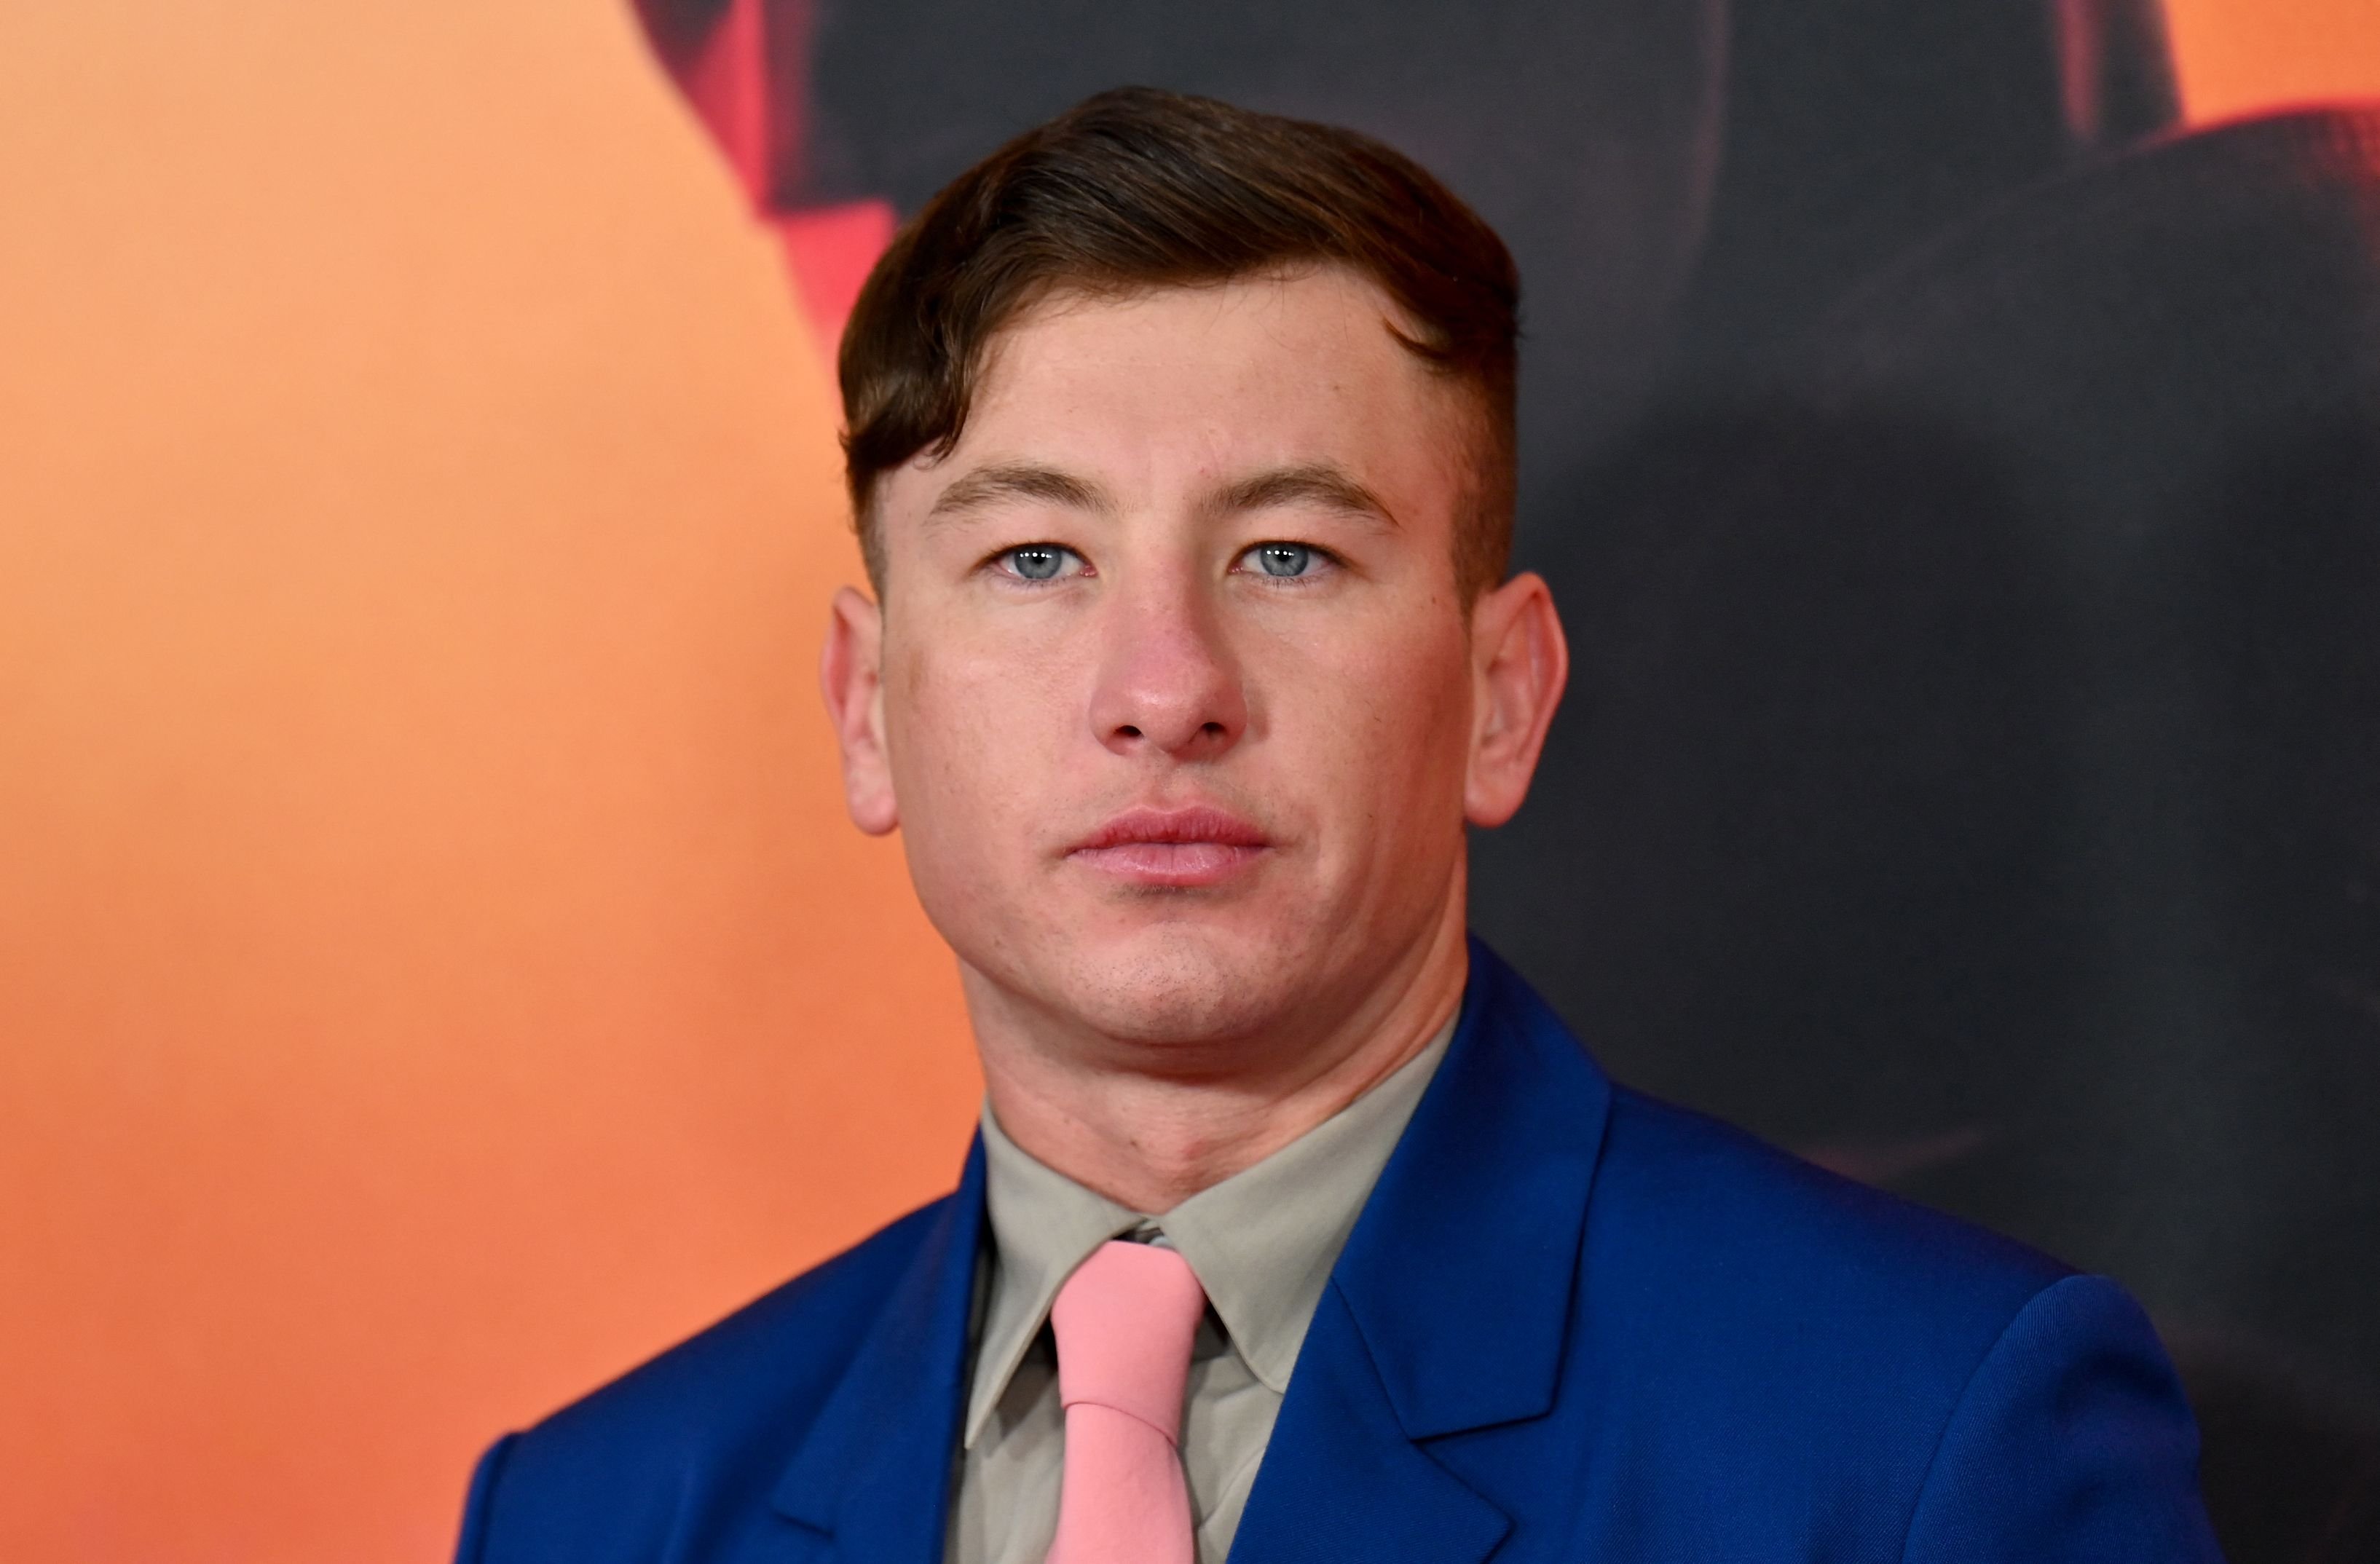 Joker actor Barry Keoghan attends the premiere of The Batman